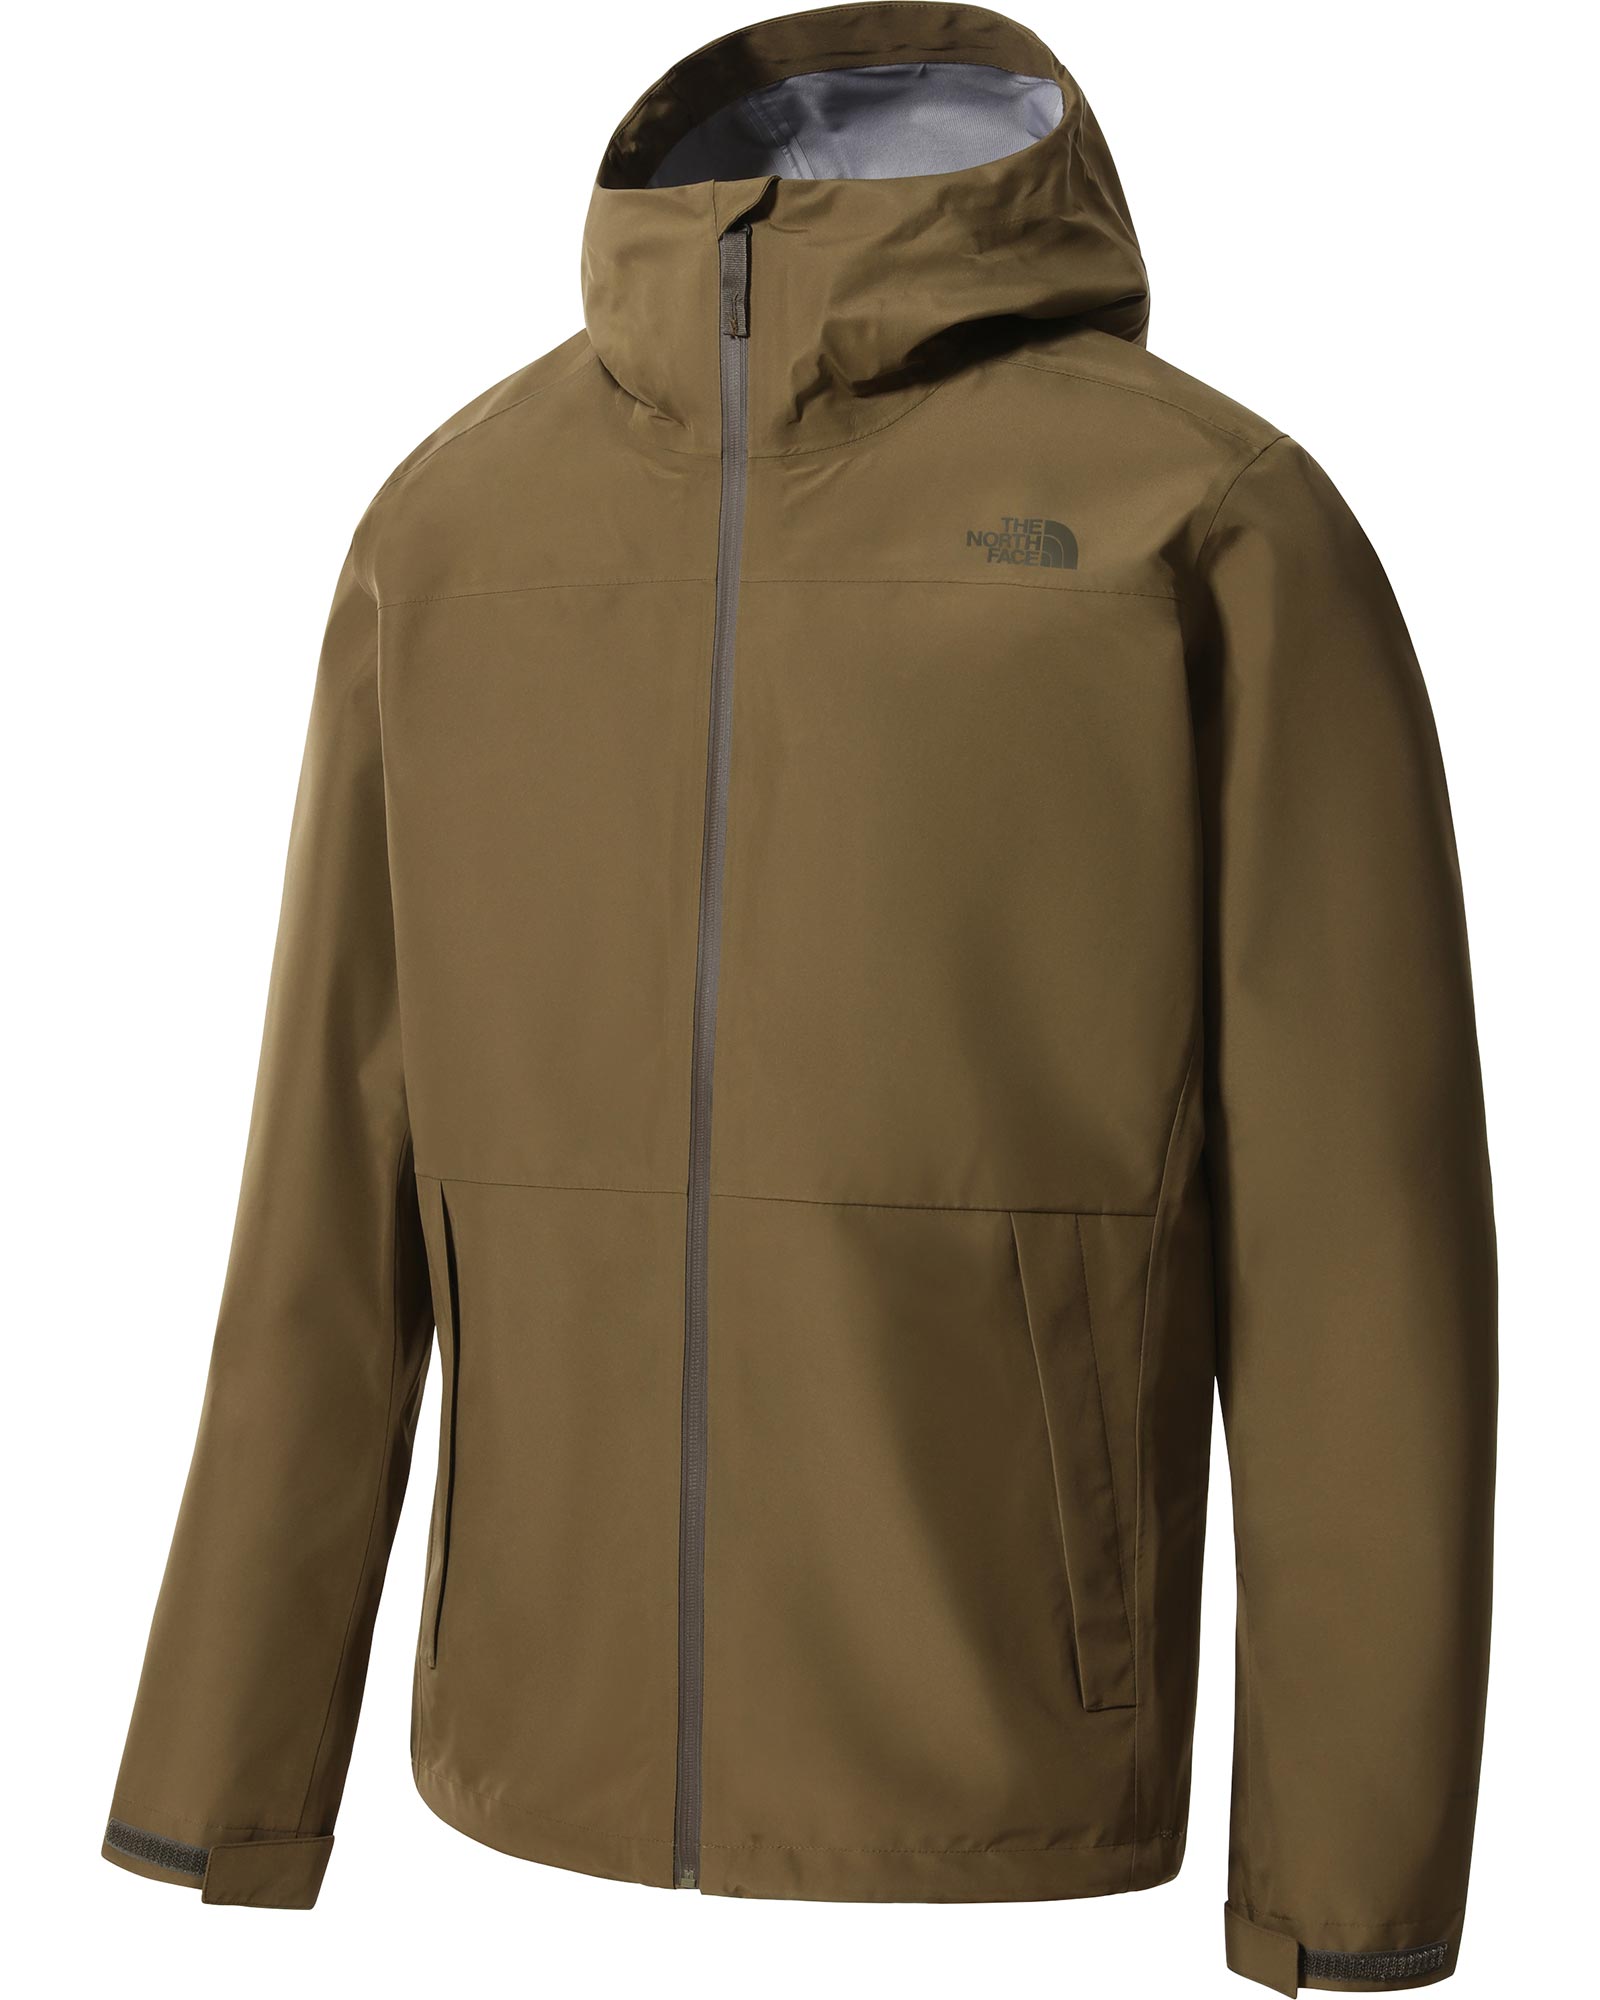 The North Face Dryzzle FUTURELIGHT Men’s Jacket - Military Olive XL